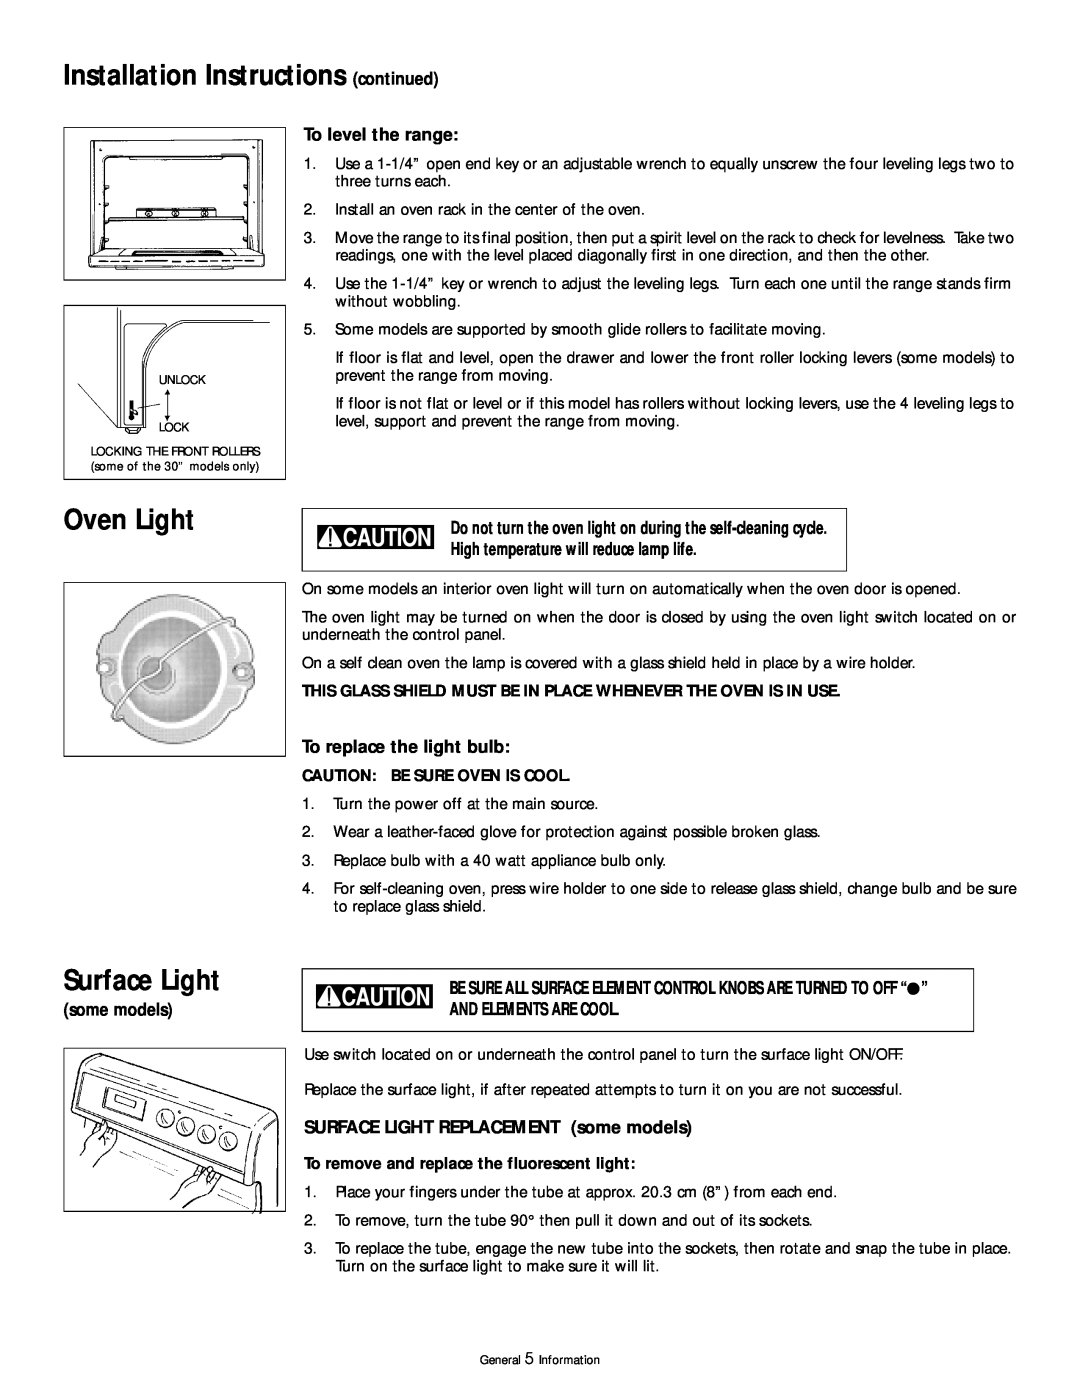 Frigidaire 318200404 manual Installation Instructions continued, Oven Light, Surface Light, To level the range, some models 